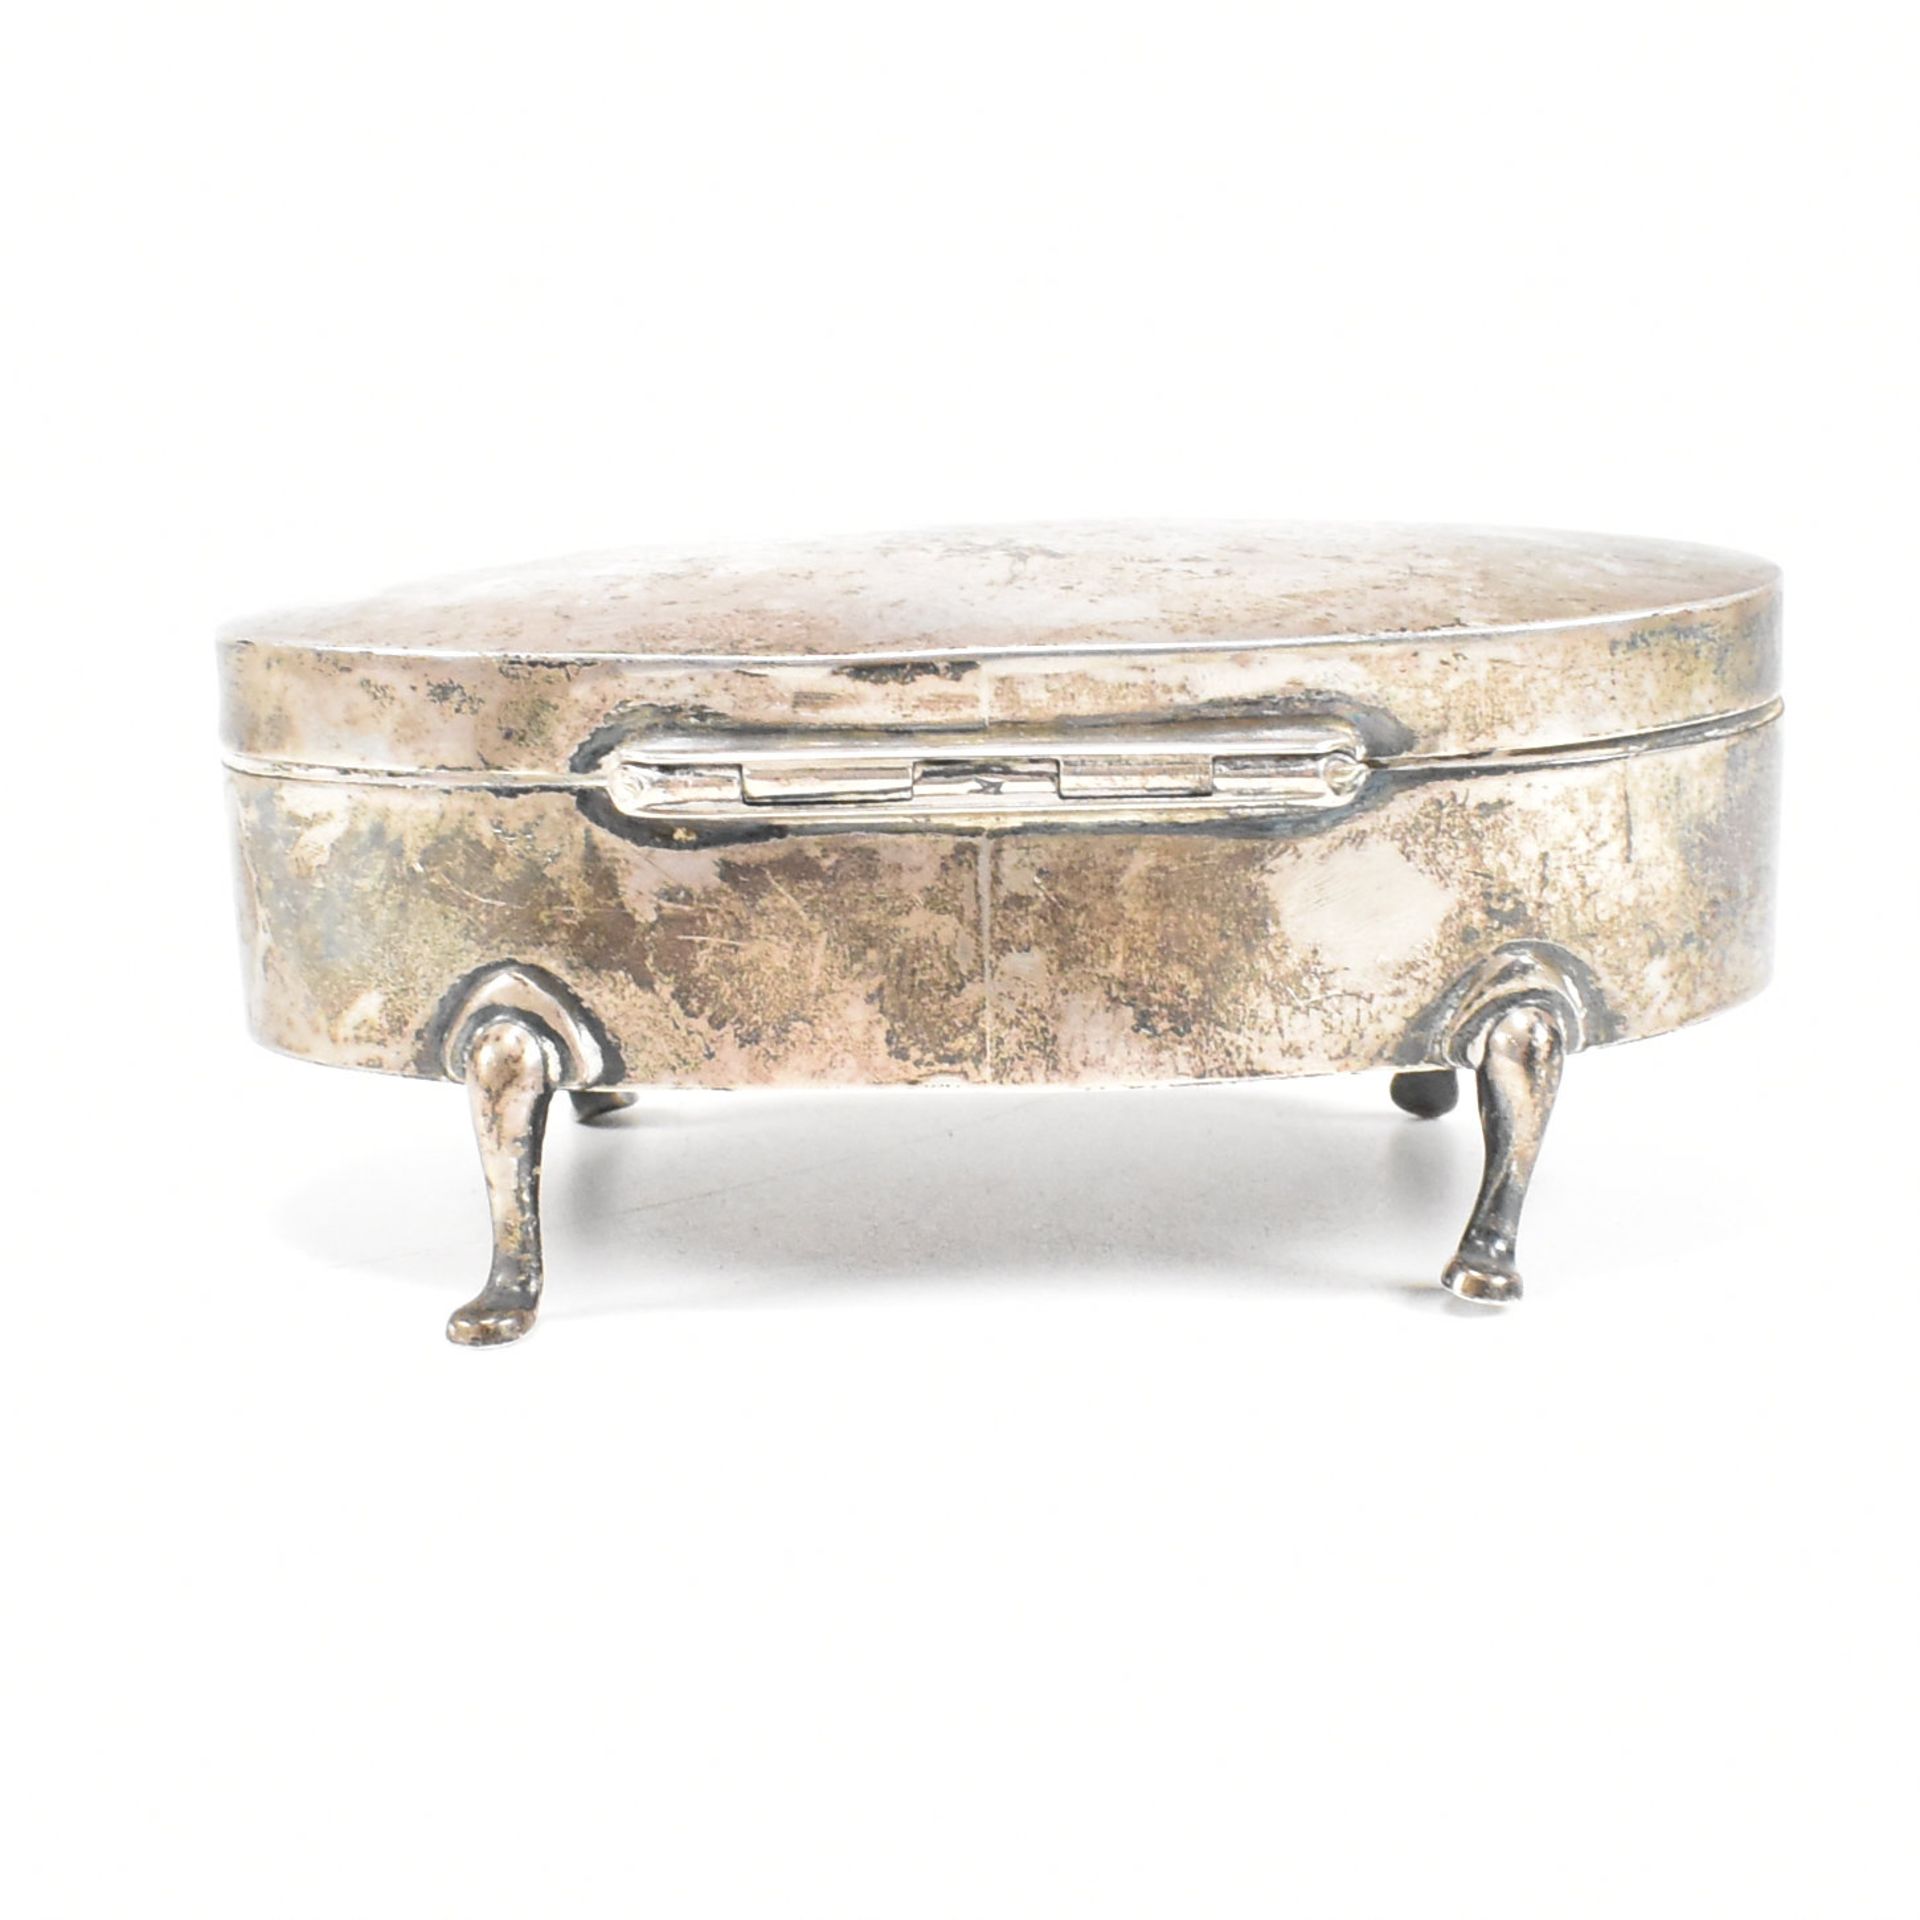 GEORGE V HALLMARKED SILVER MOUNTED JEWELLERY BOX - Image 6 of 11